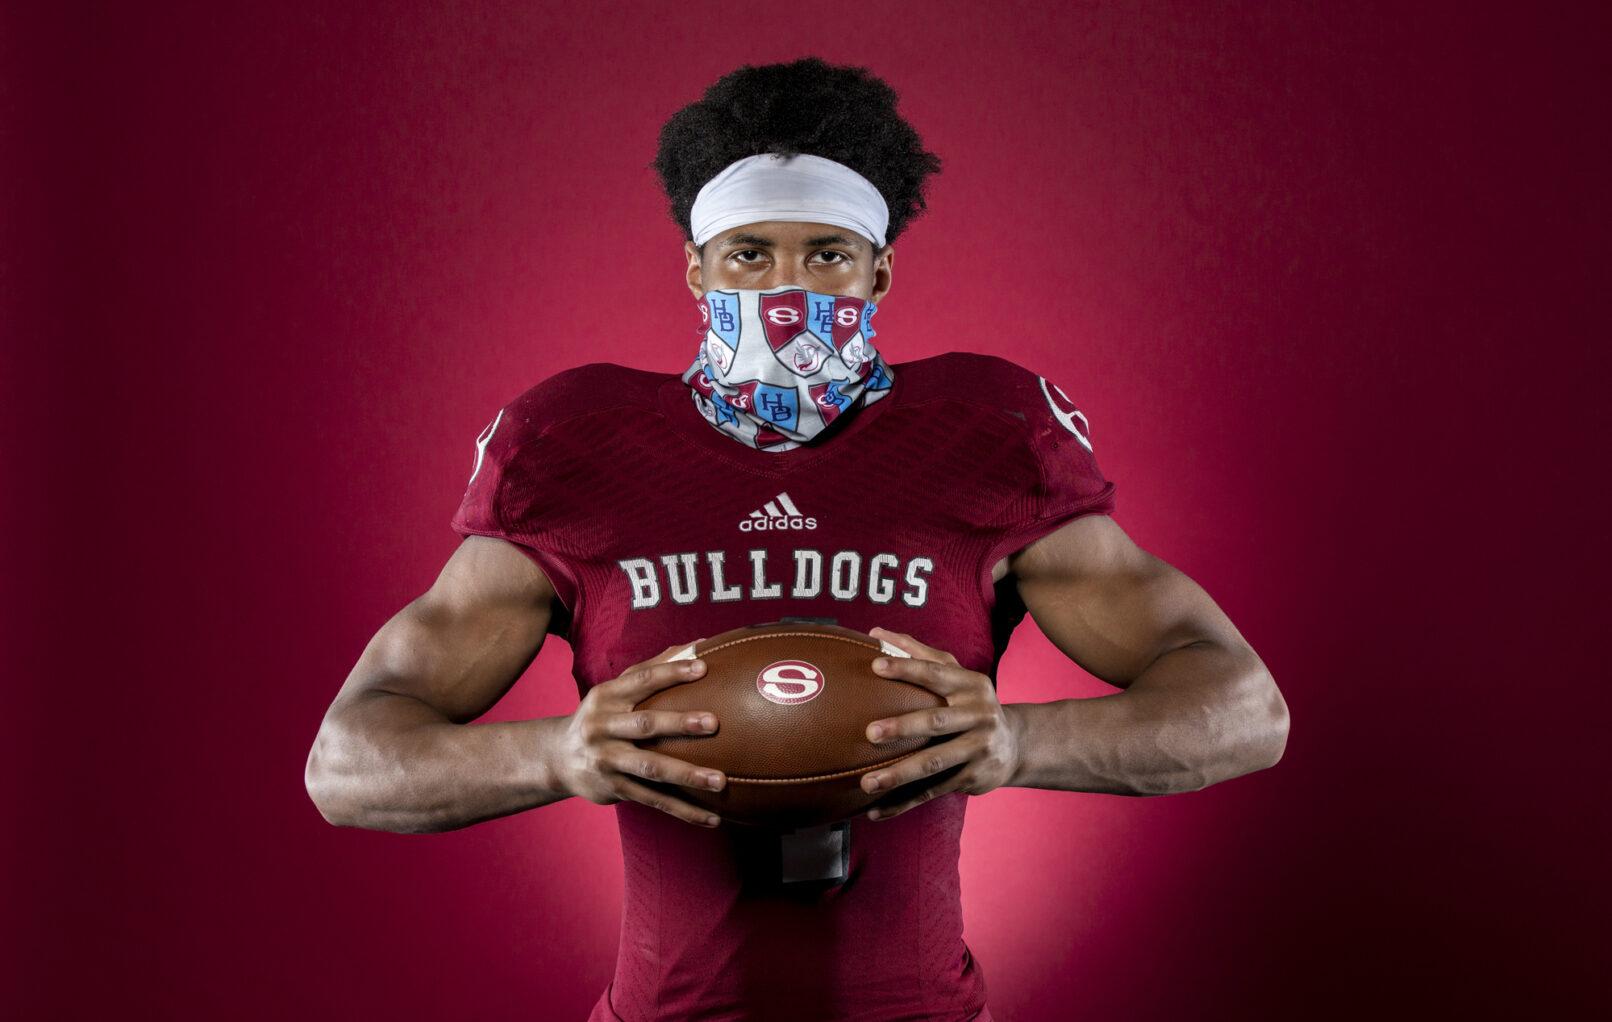 Portrait of a football player wearing a mask standing in front of red background.